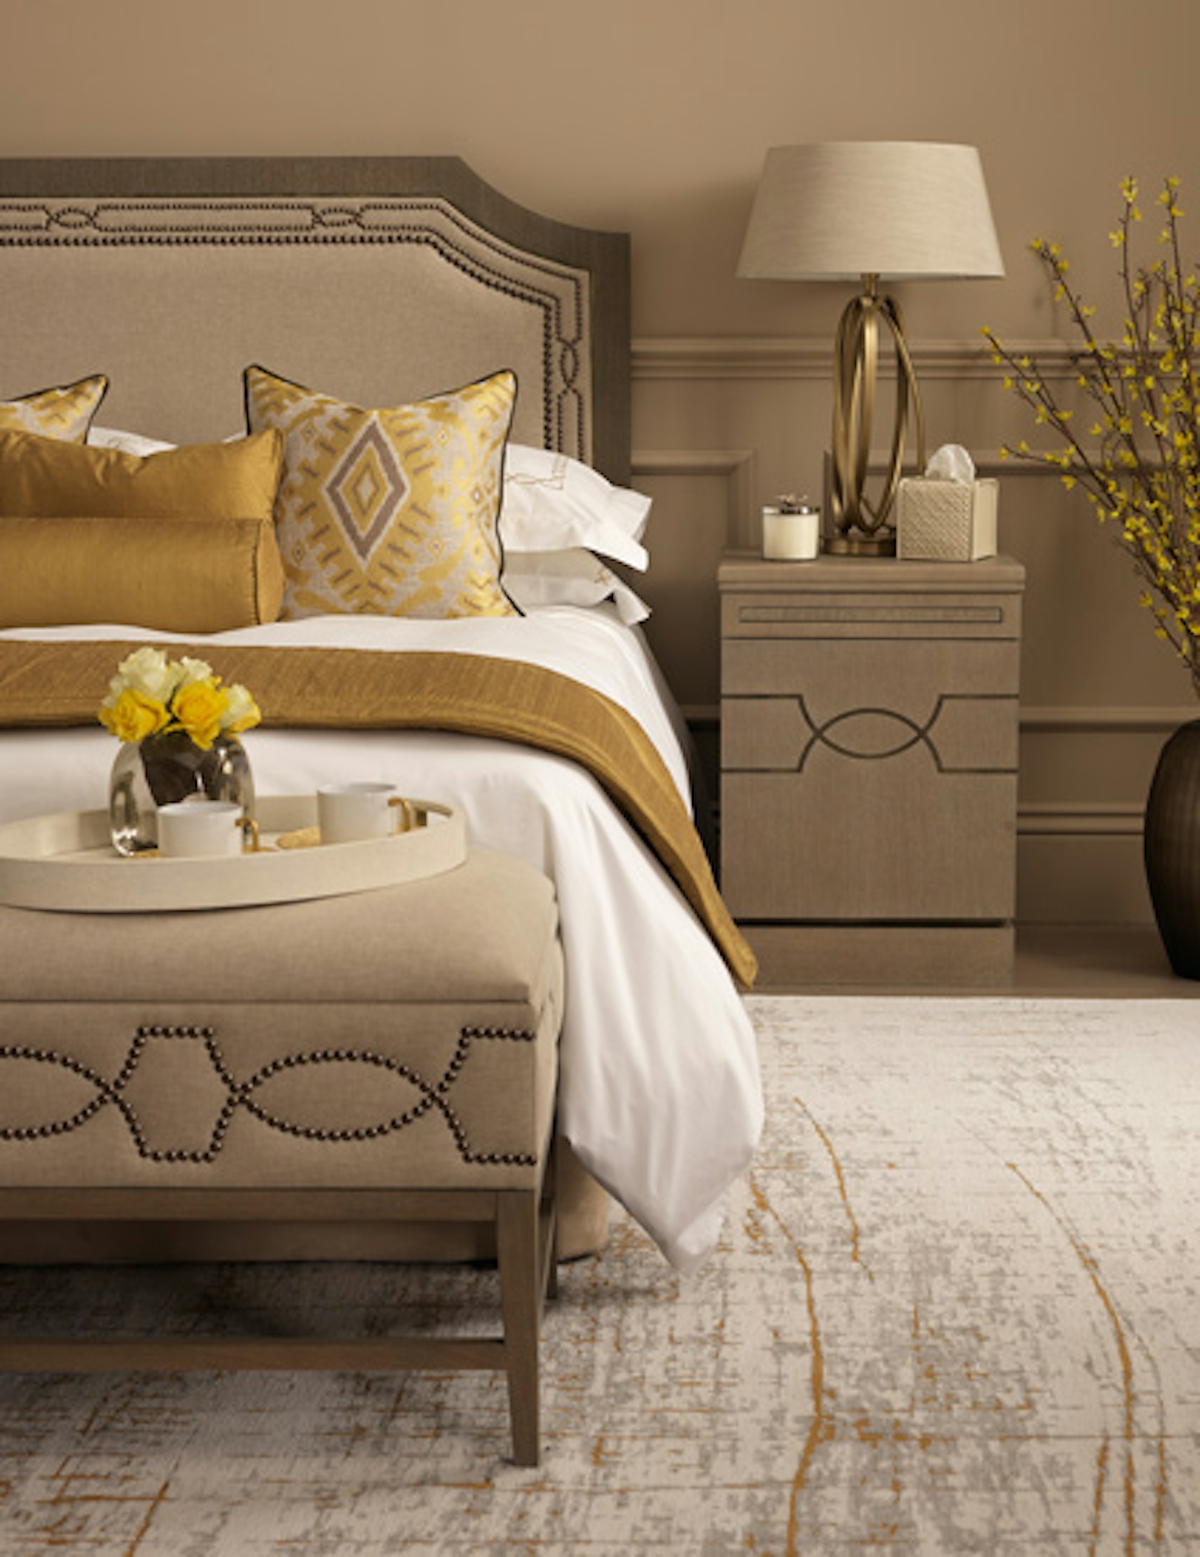 Luxury Bed Buying Guide - Types of Bedsteads – Eaton Square Collection – Bedroom Ideas – LuxDeco.com